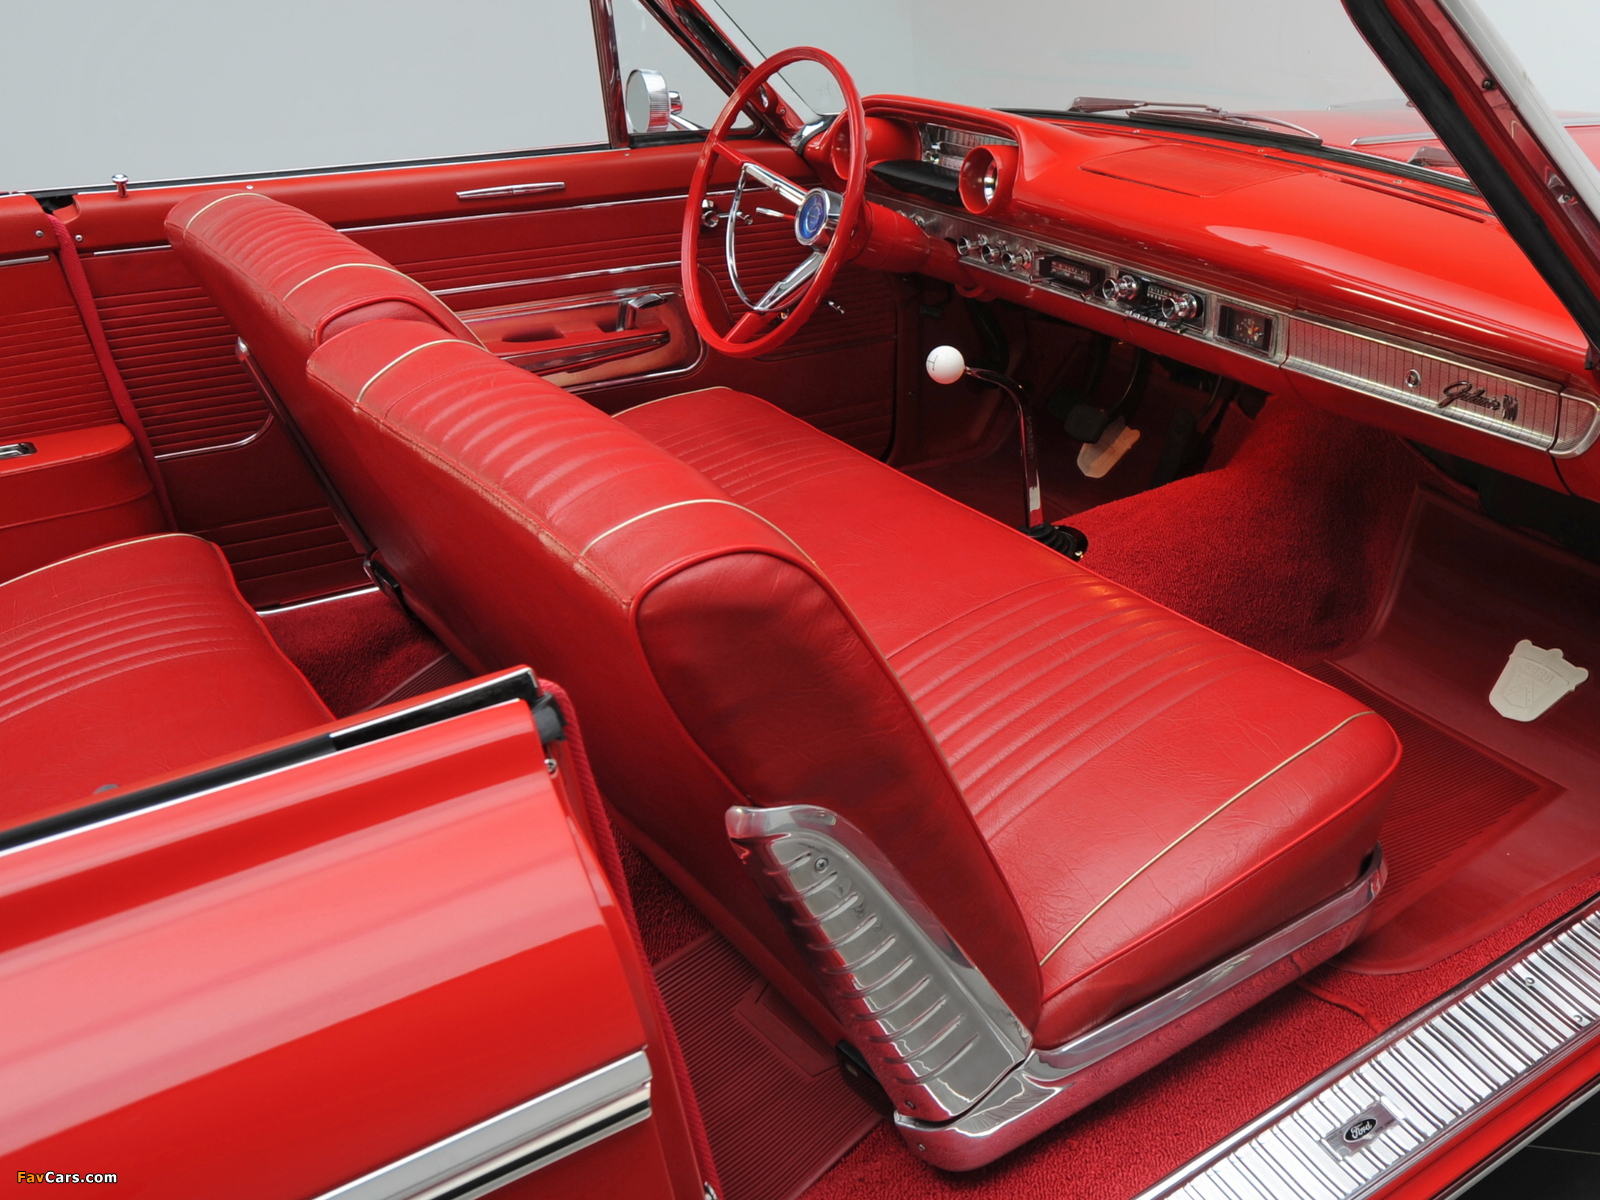 Pictures of Ford Galaxie 500 Sunliner (65) 1963 (1600 x 1200)